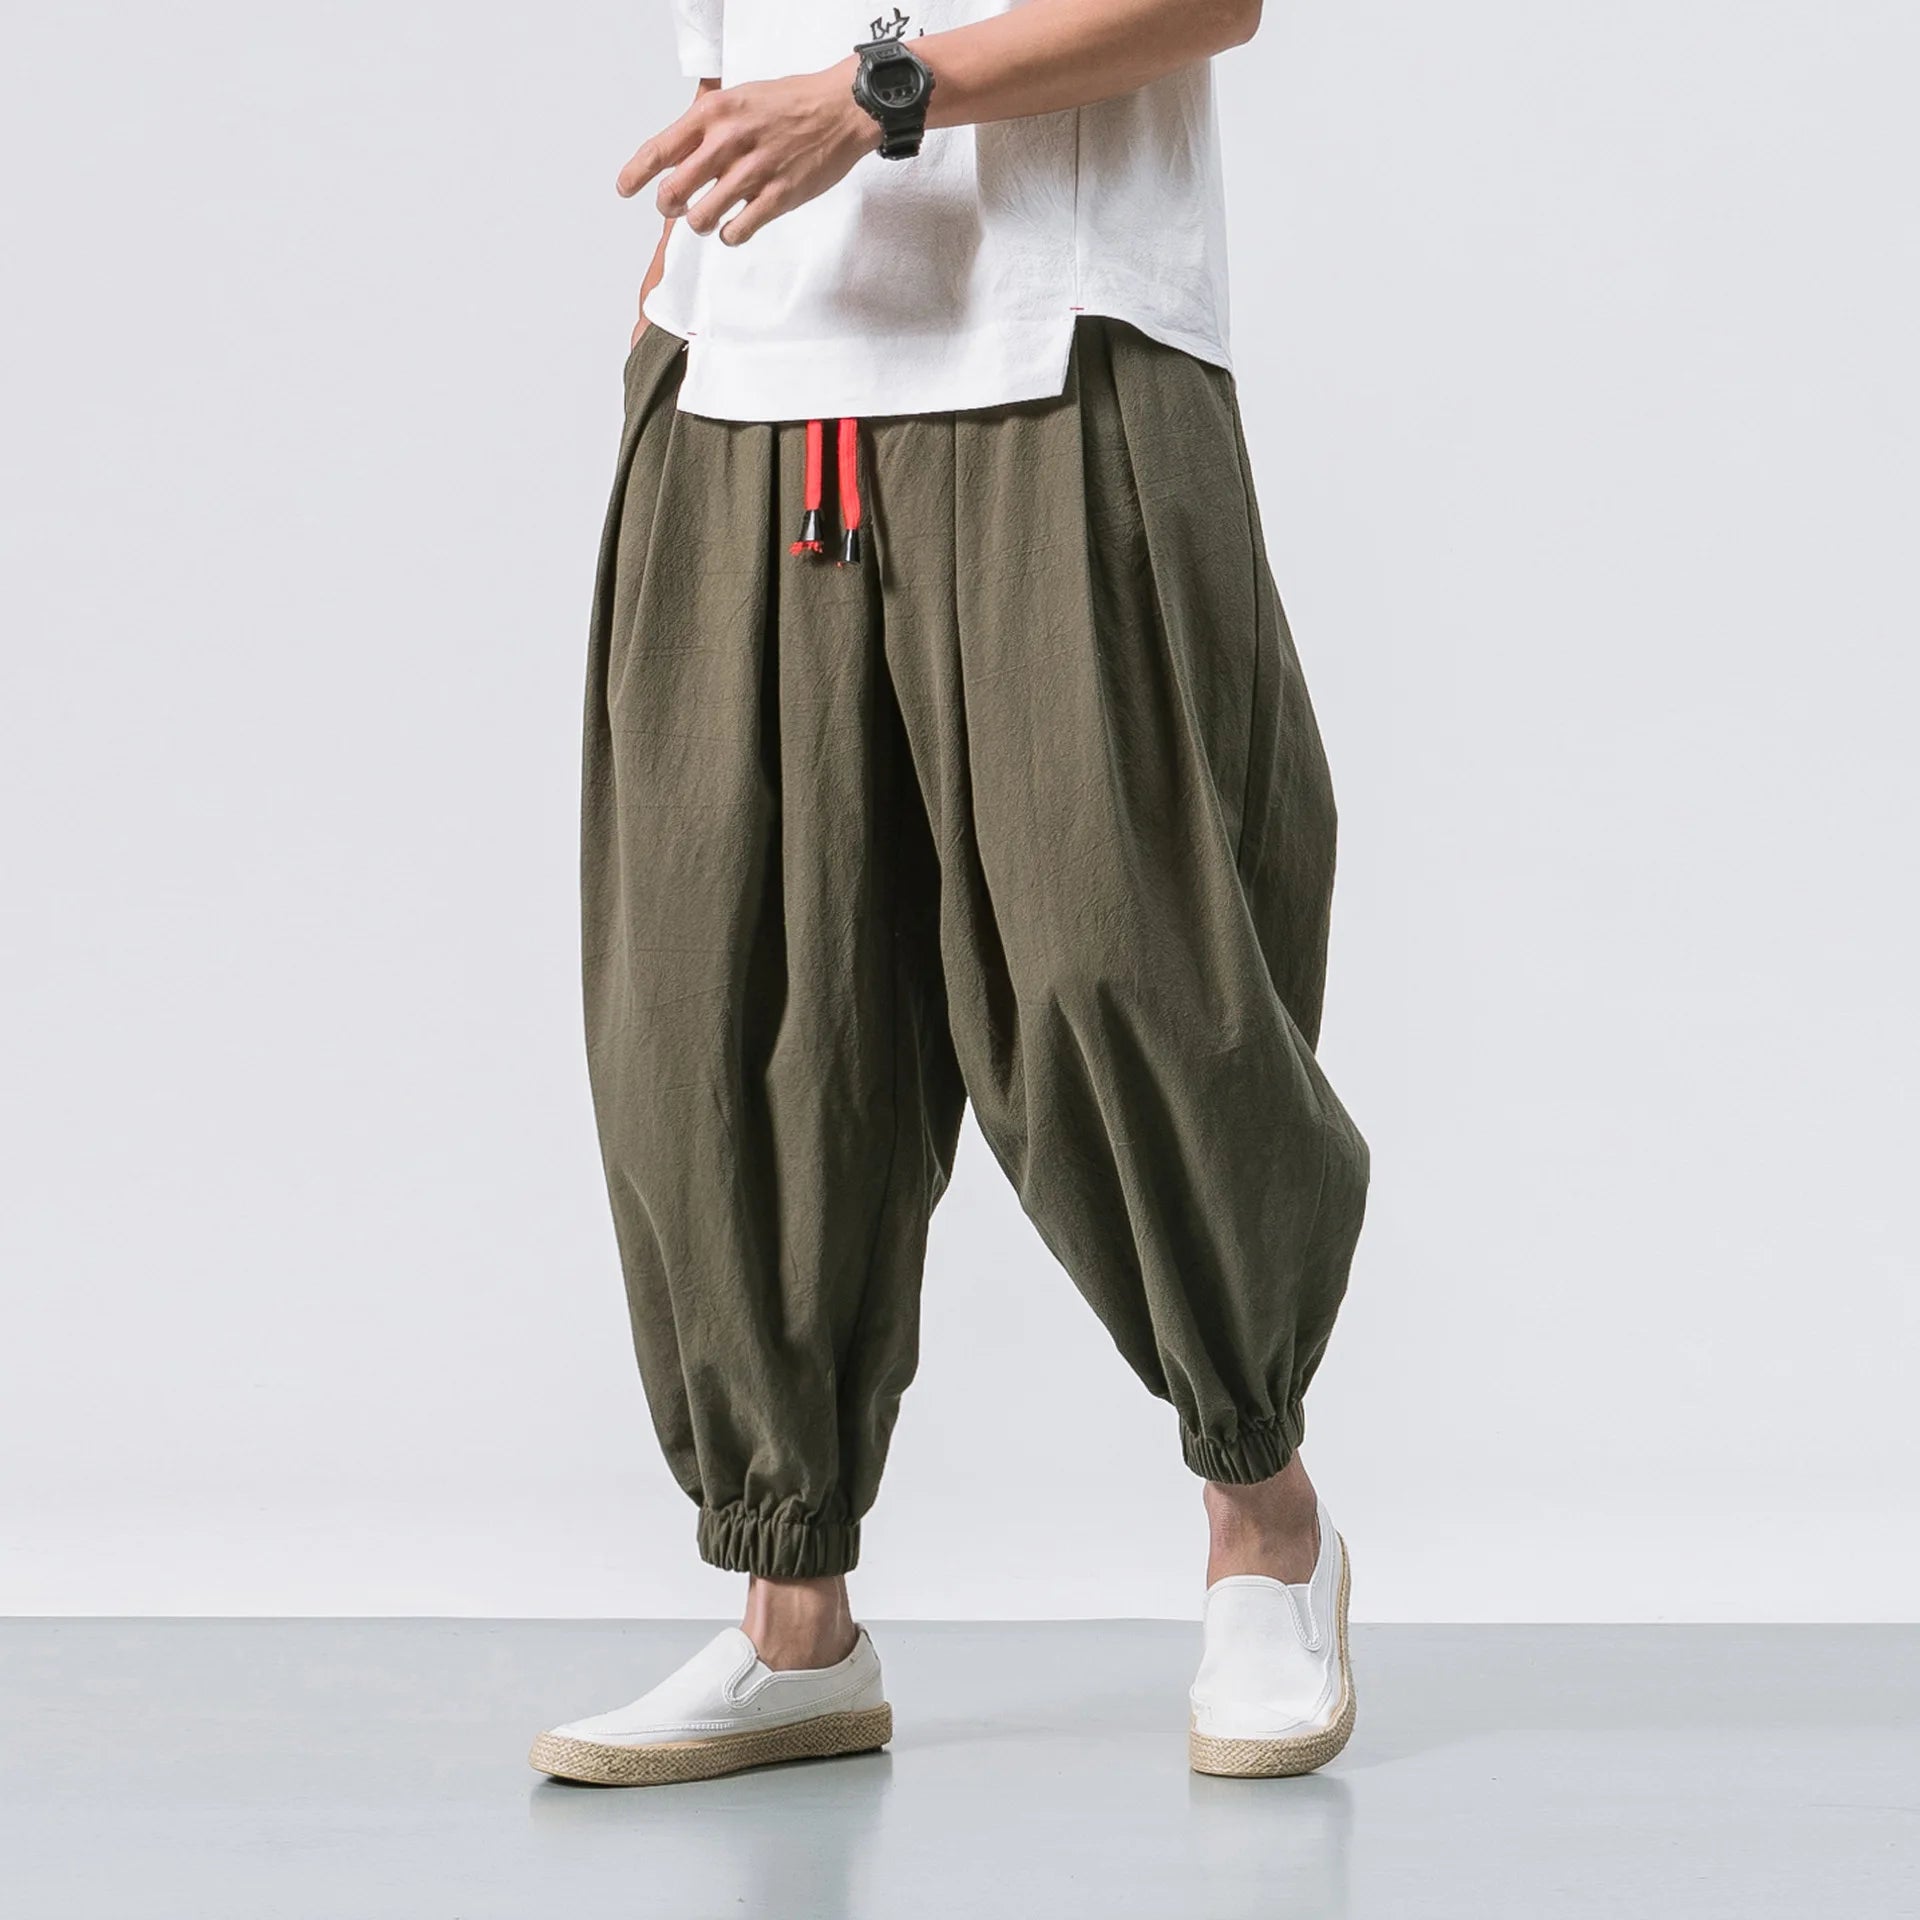 FGKKS Oversize Men's Loose Harem Pants: High-Quality Autumn Chinese Linen Sweatpants - Casual Brand Trousers for Men